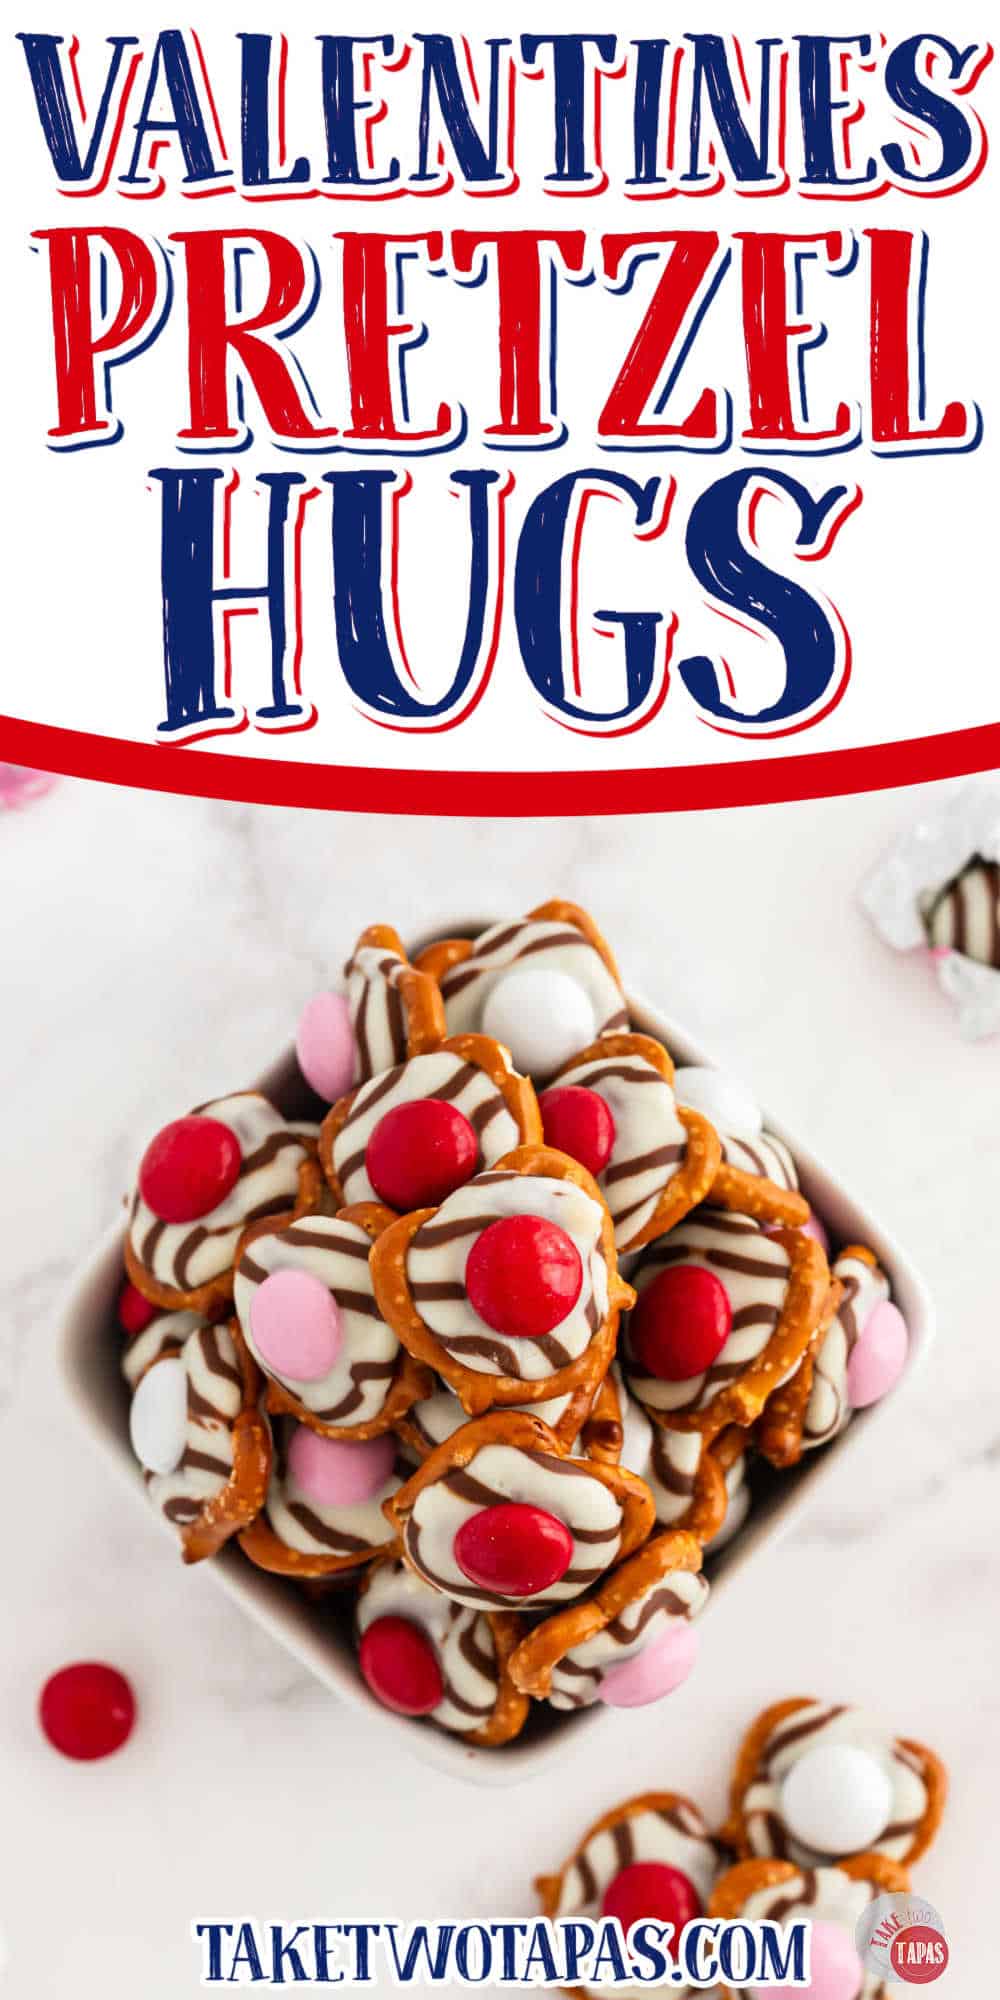 bowl of candy with text "valentines pretzel hugs"